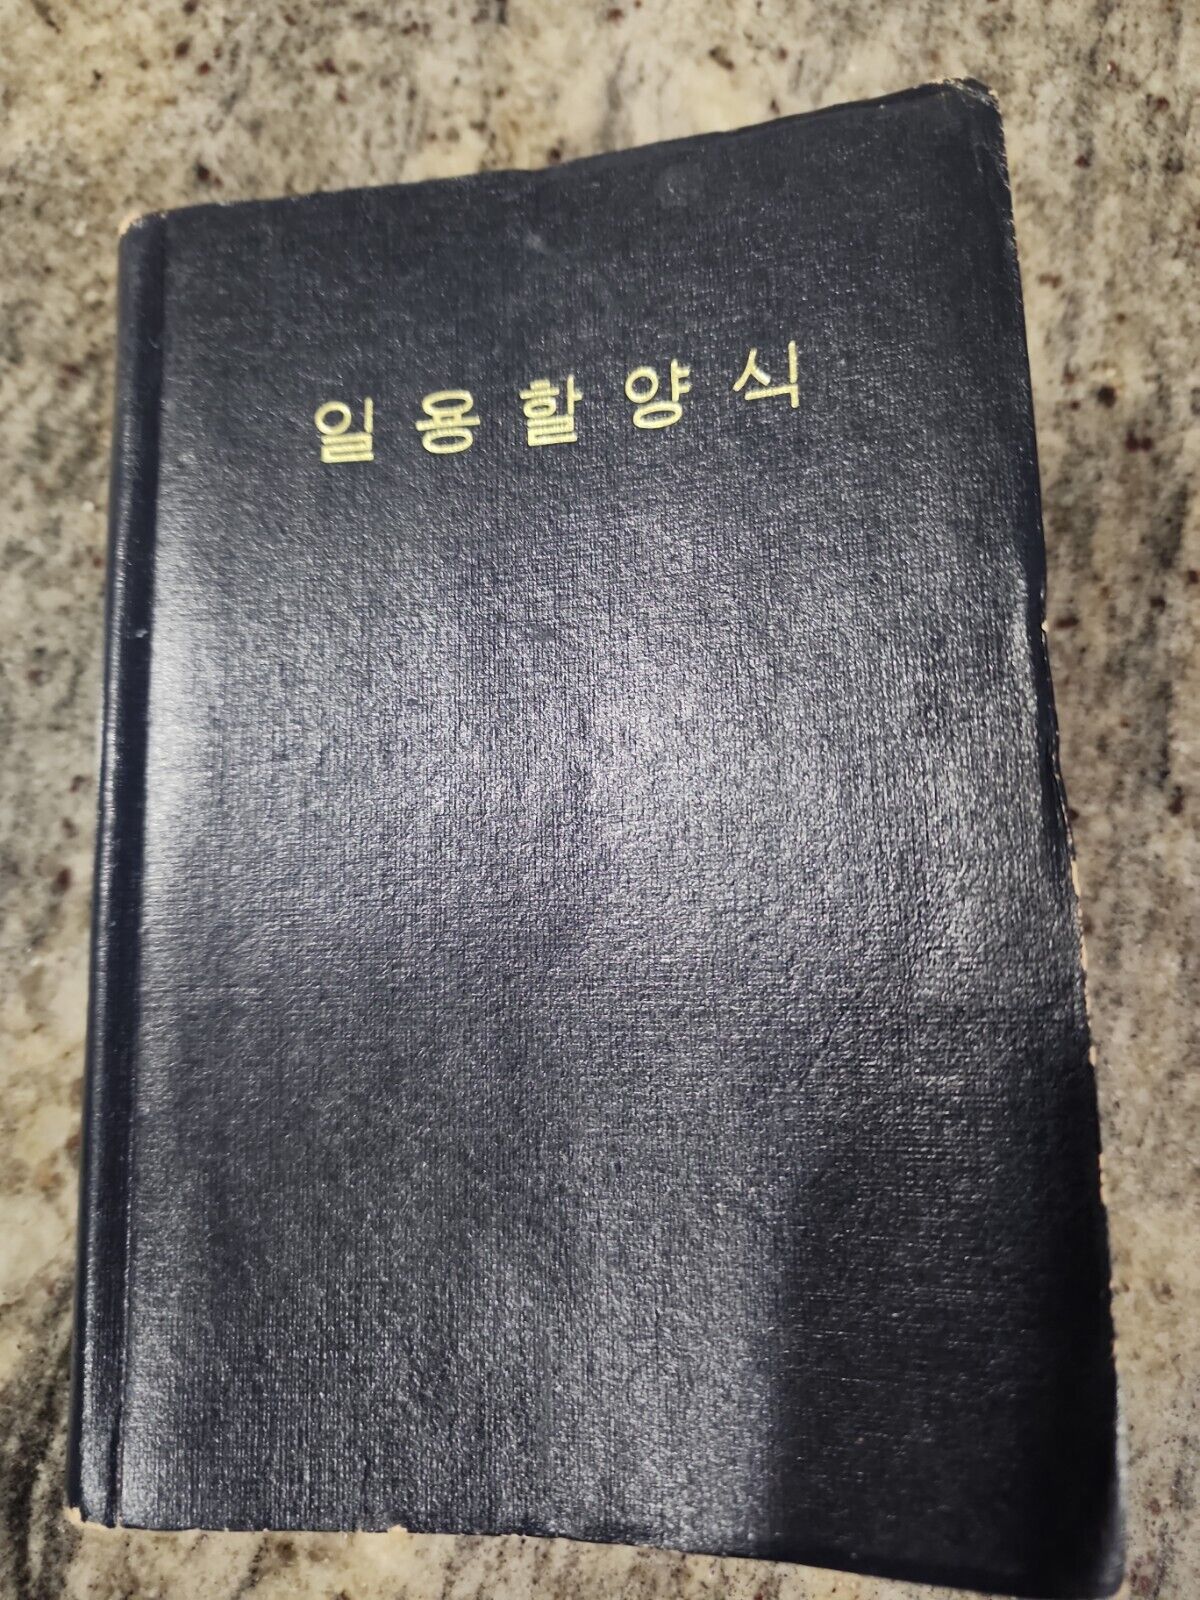 Vintage Asian Hymnal Book. Daily Bread Daily Devotion